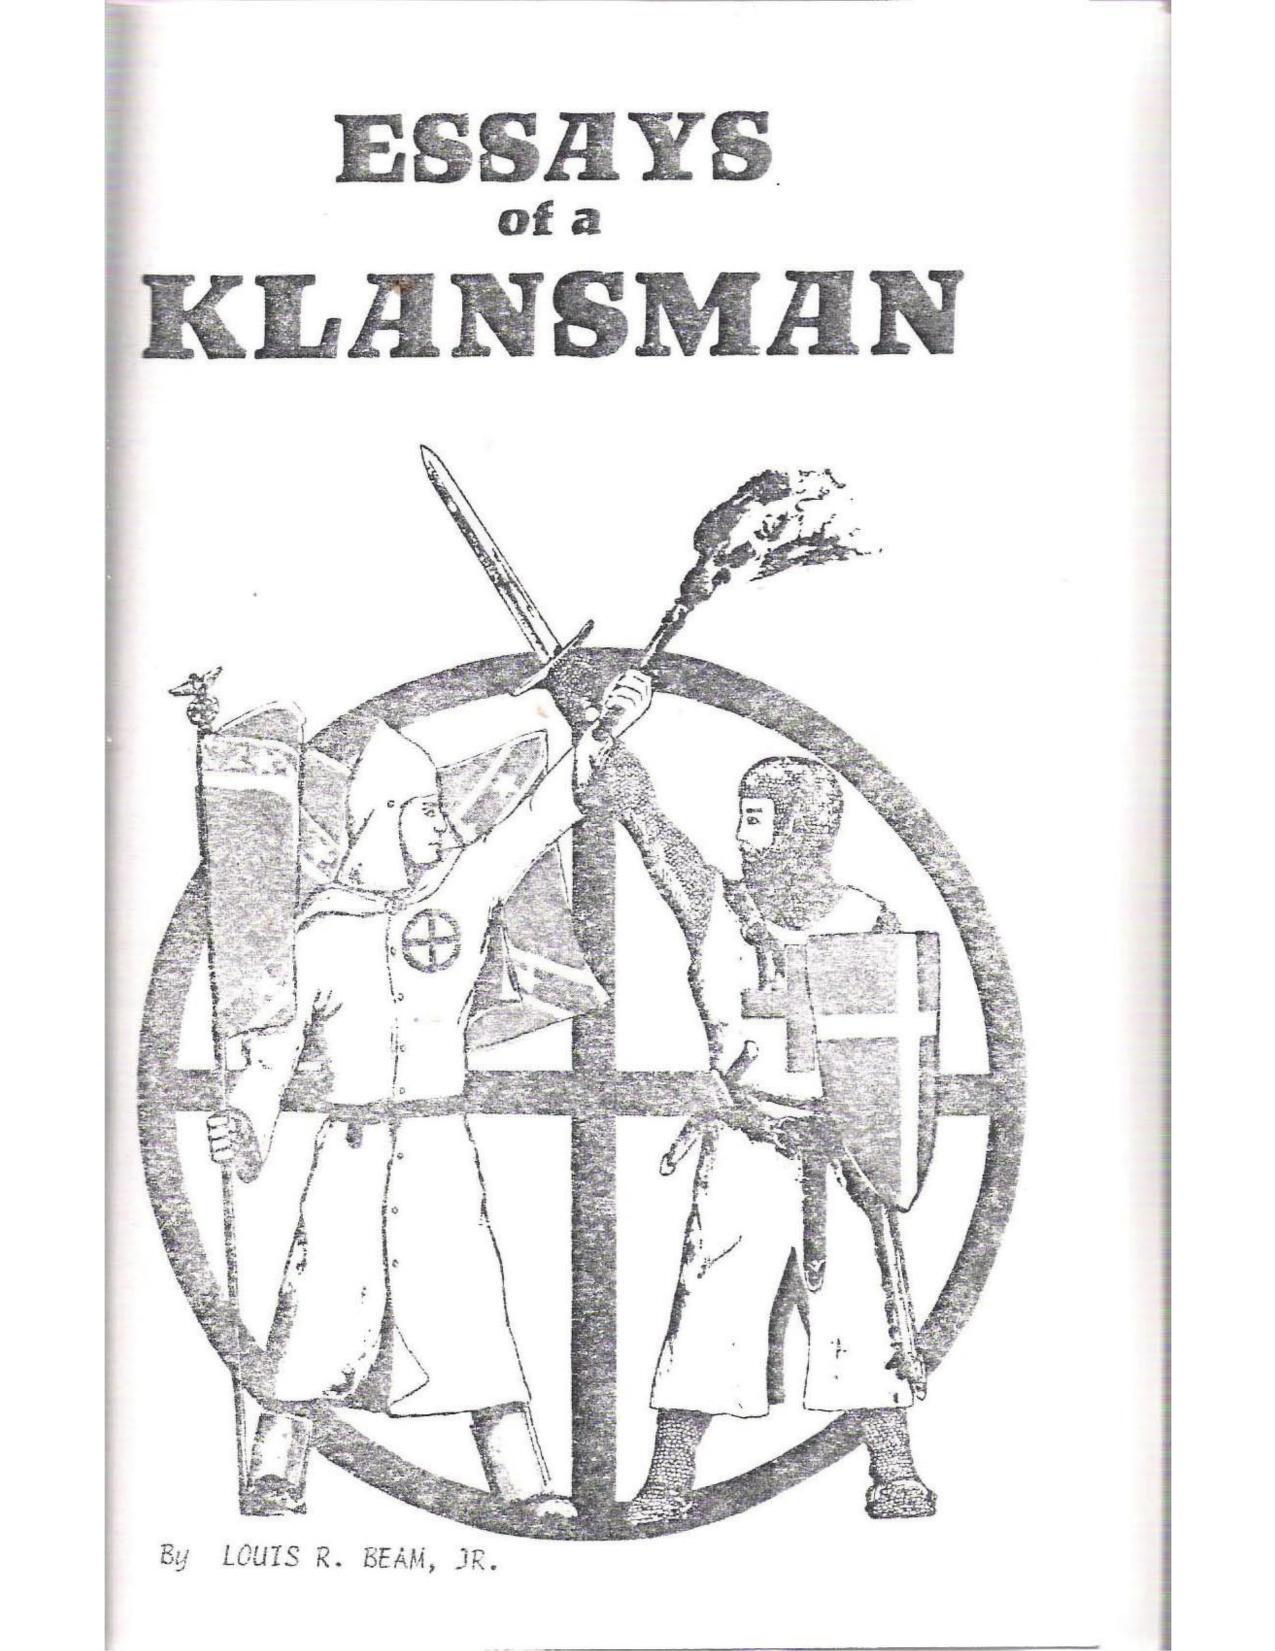 Essays of a klansman : being a compendium of Ku Klux Klan ideology, organizational methods, history, tactics, and opinions, with interpolations by the author